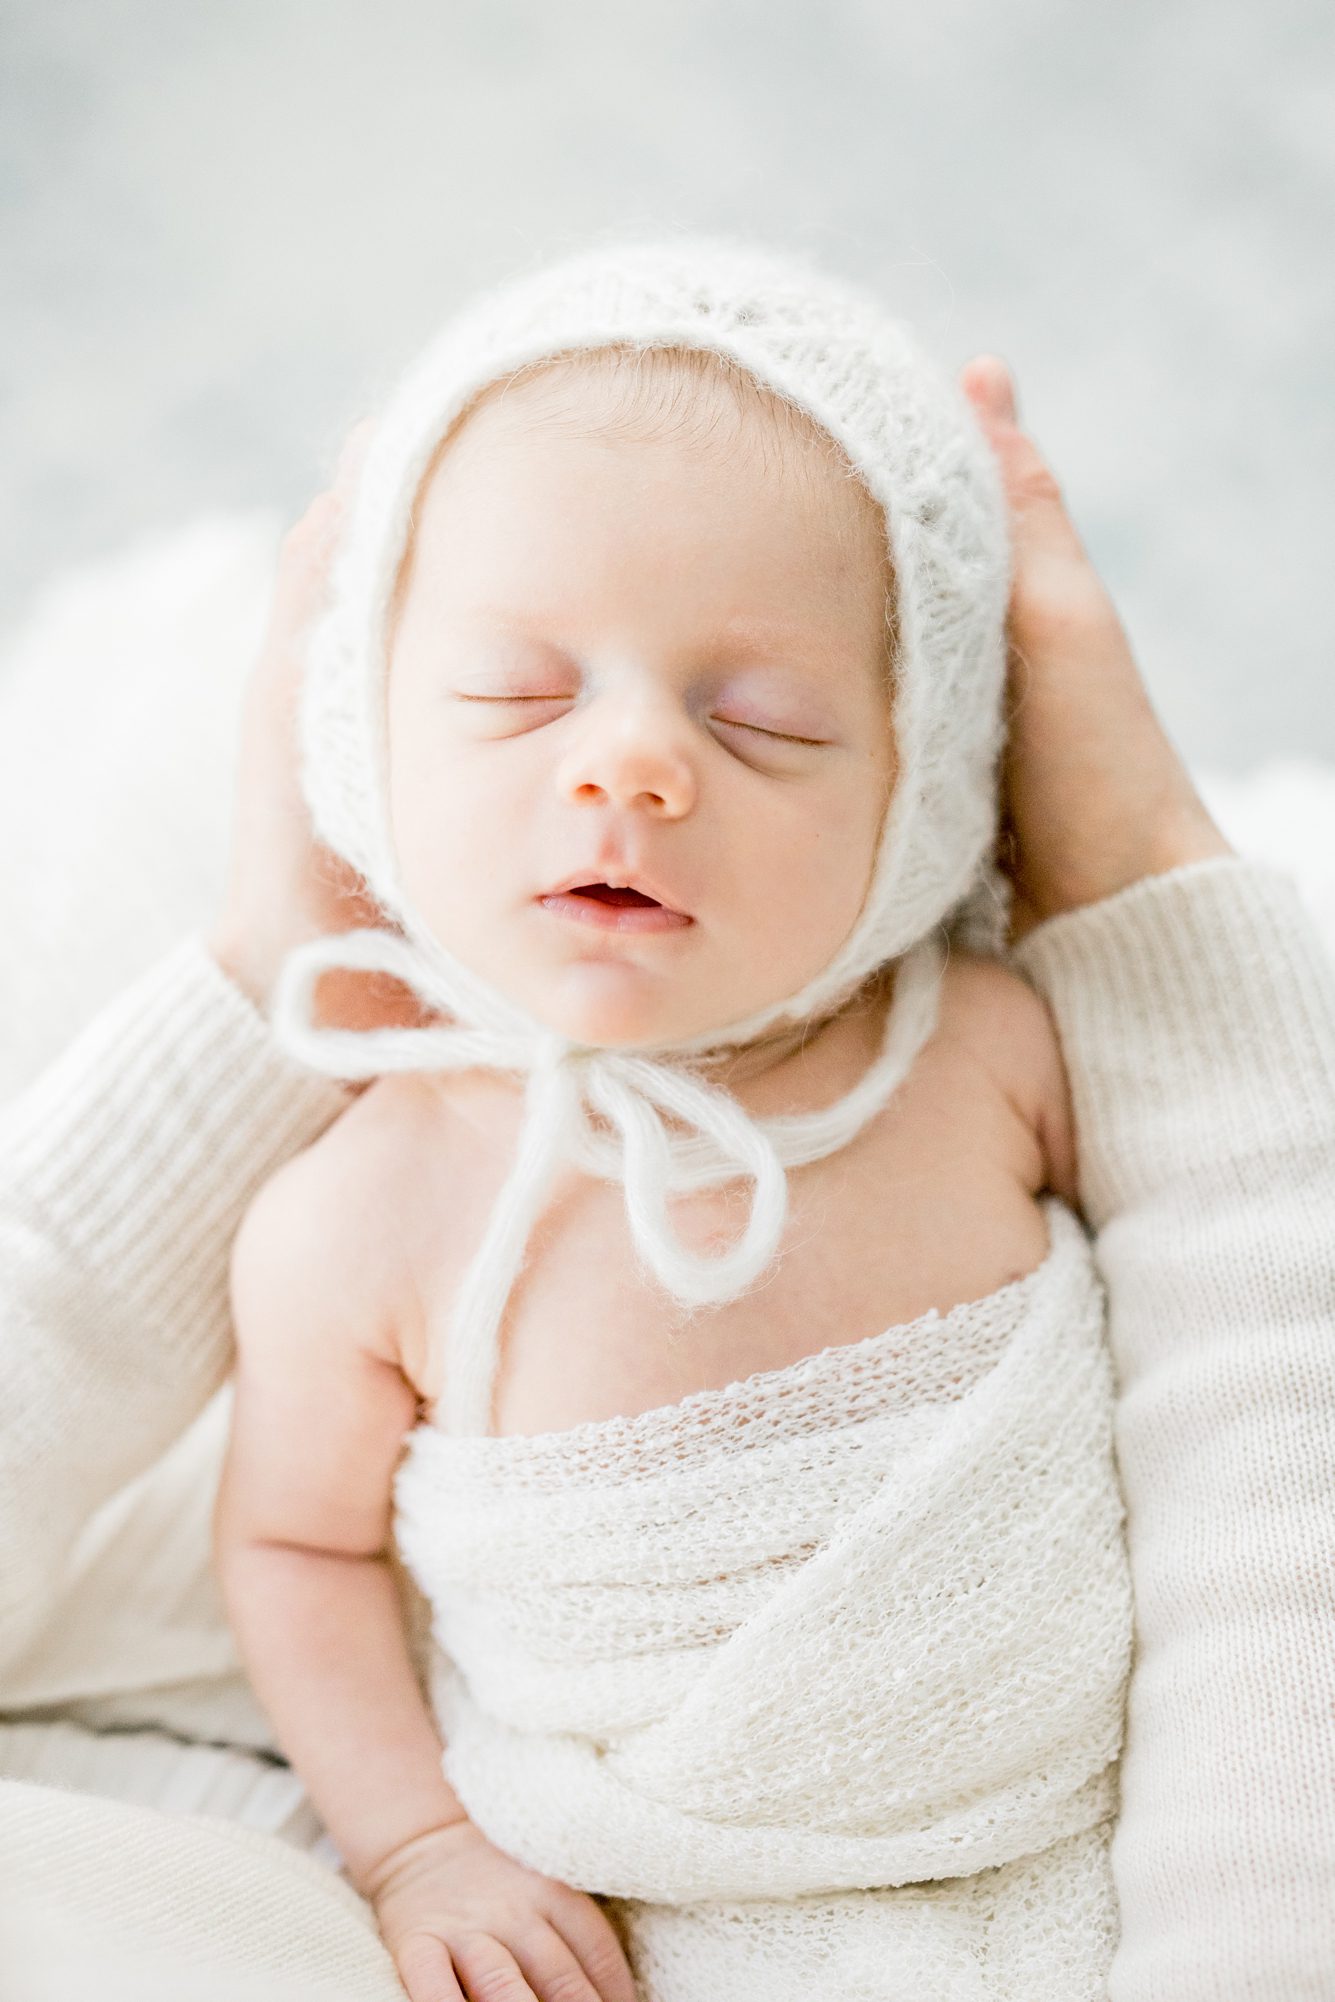 Closeup of baby wearing white bonnet in Chevy Chase, DC newborn session. Photo by LRG Portraits